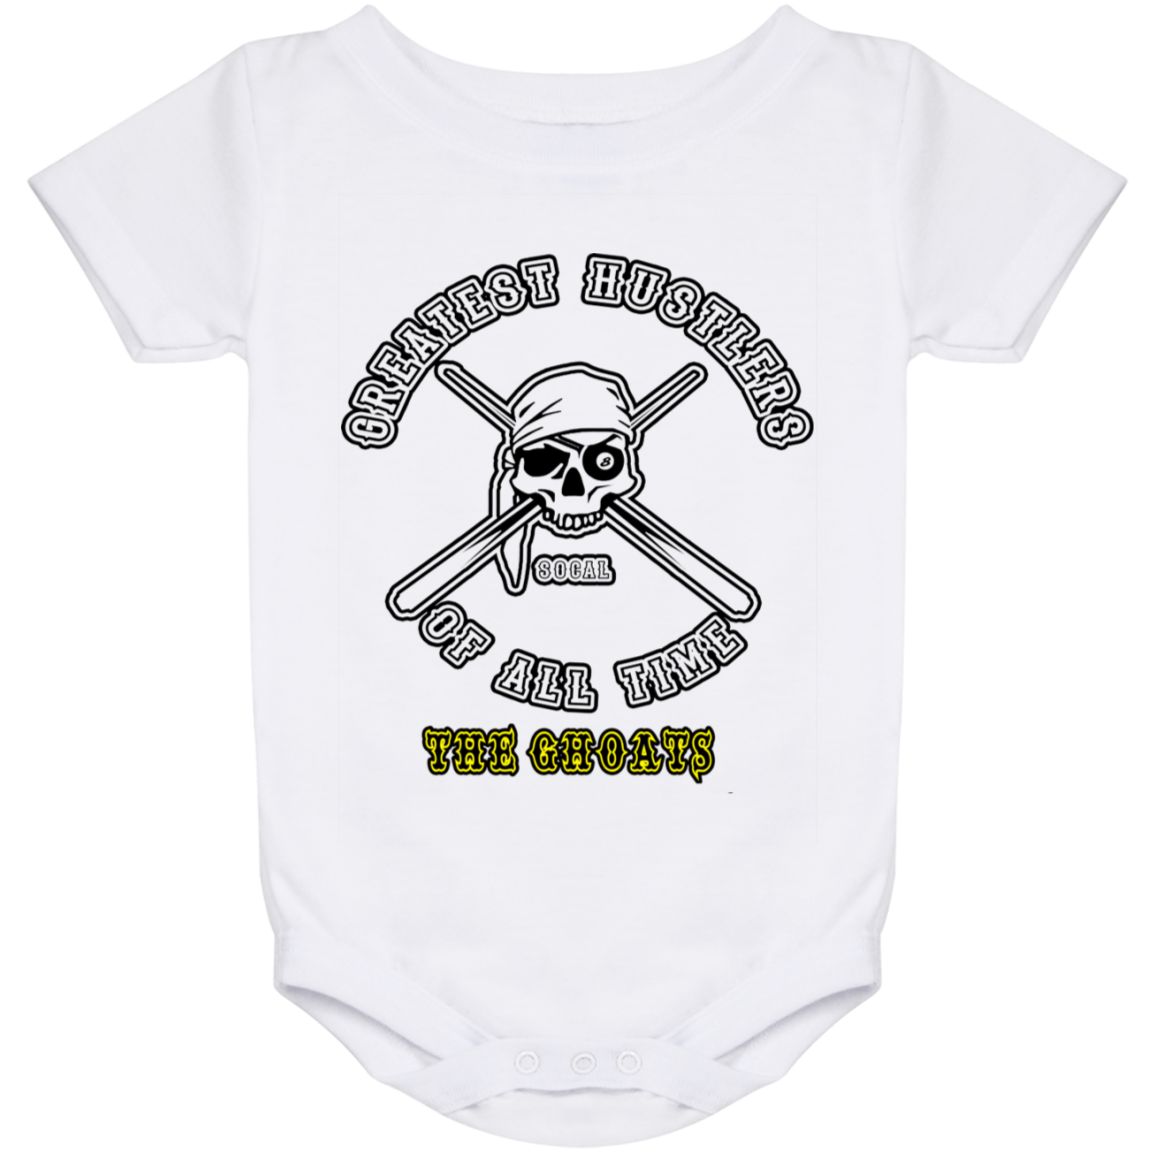 The GHOATS Custom Design. #4 Motorcycle Club Style. Ver 1/2. Baby Onesie 24 Month